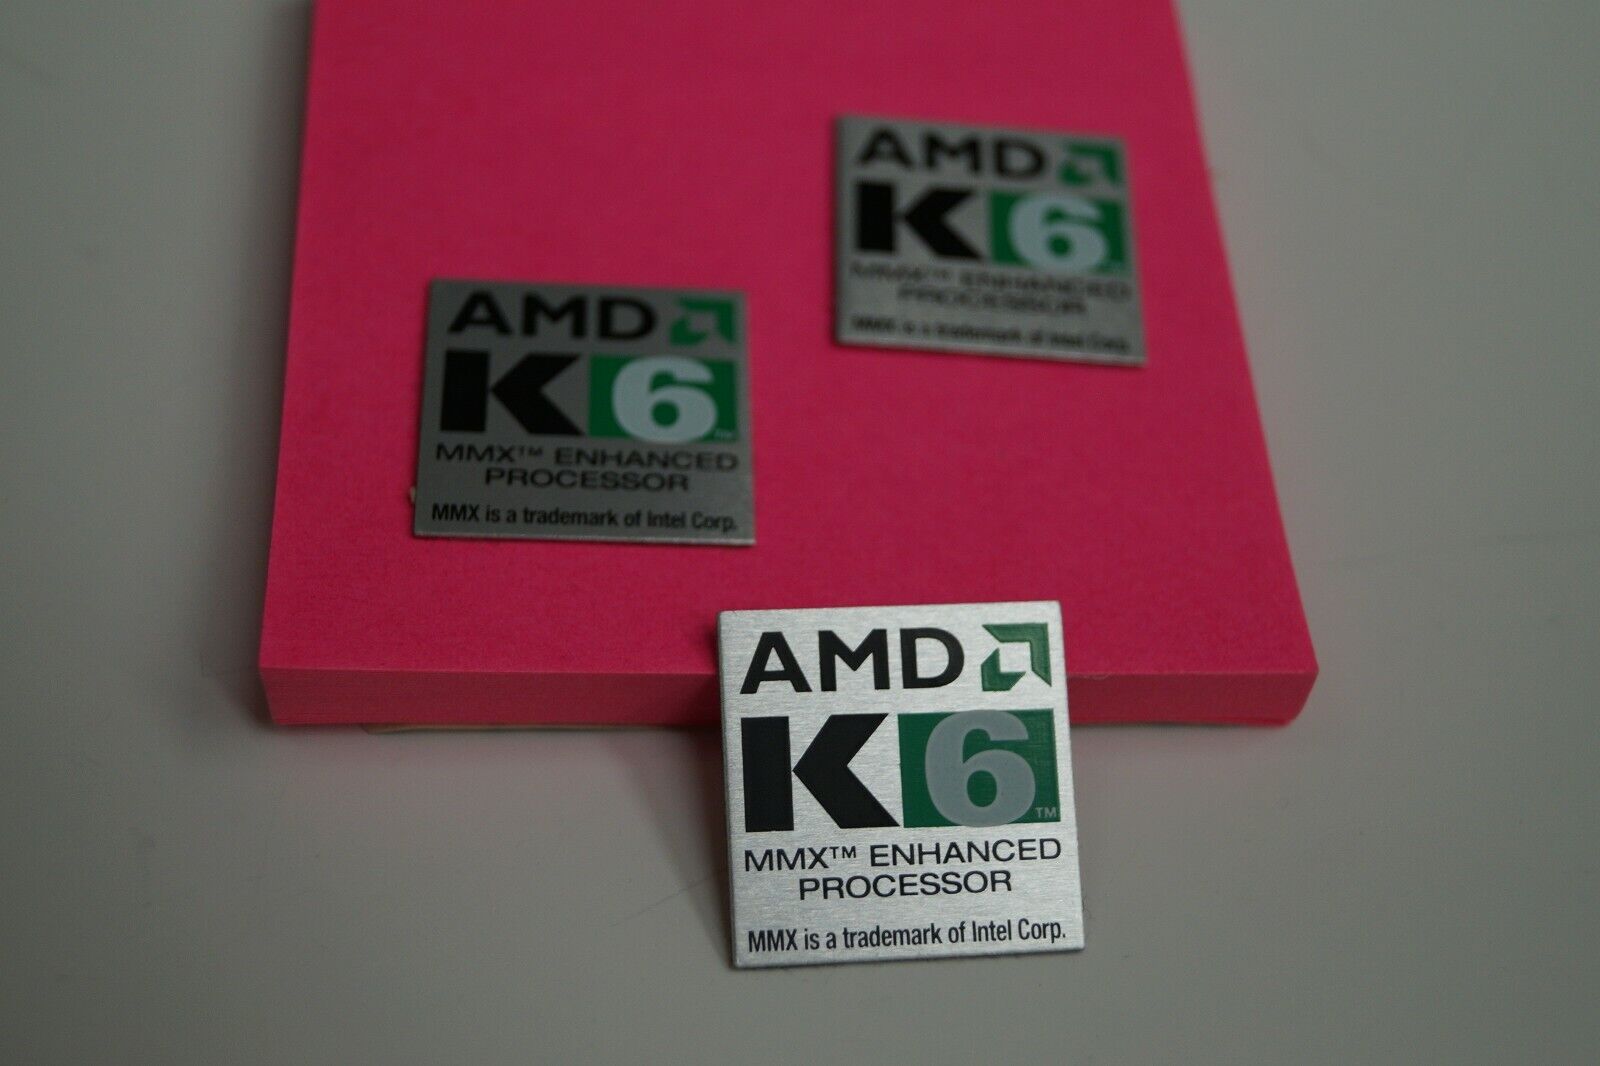 LOT of 3 AMD K6 CPU Aluminum CASE BADGE decal stickers NEW